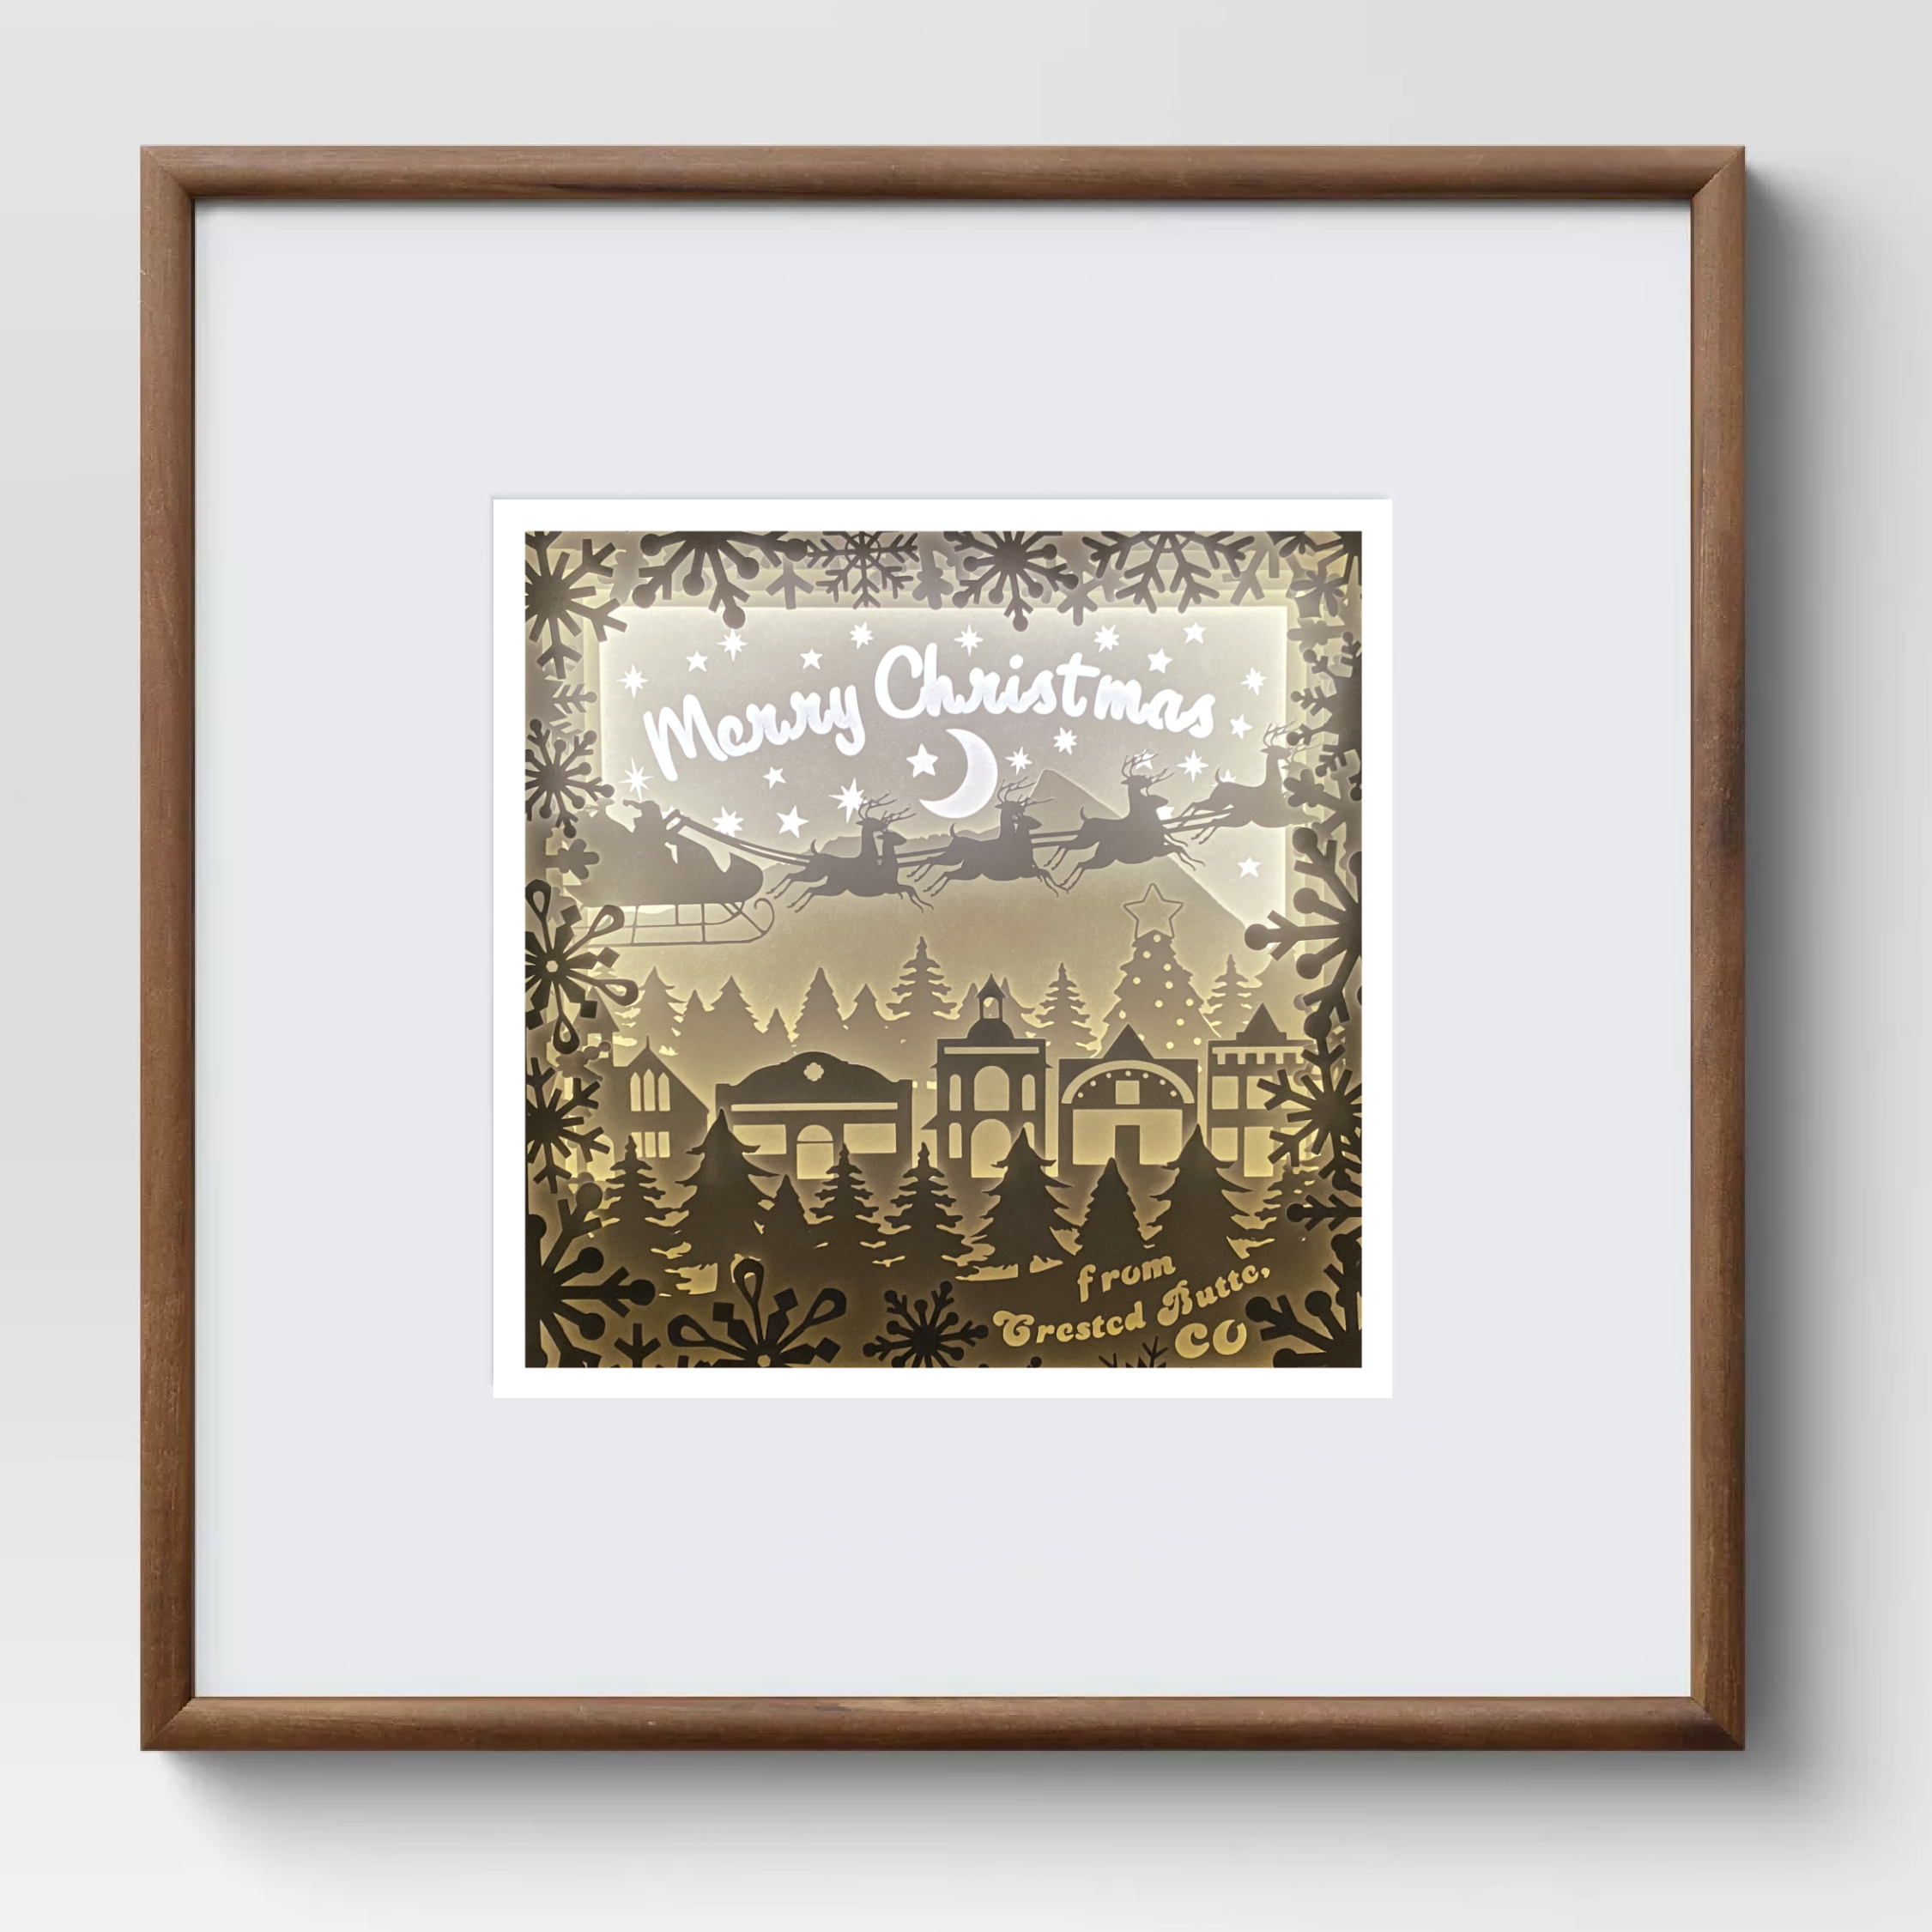 Merry Christmas from Crested Butte, CO art print